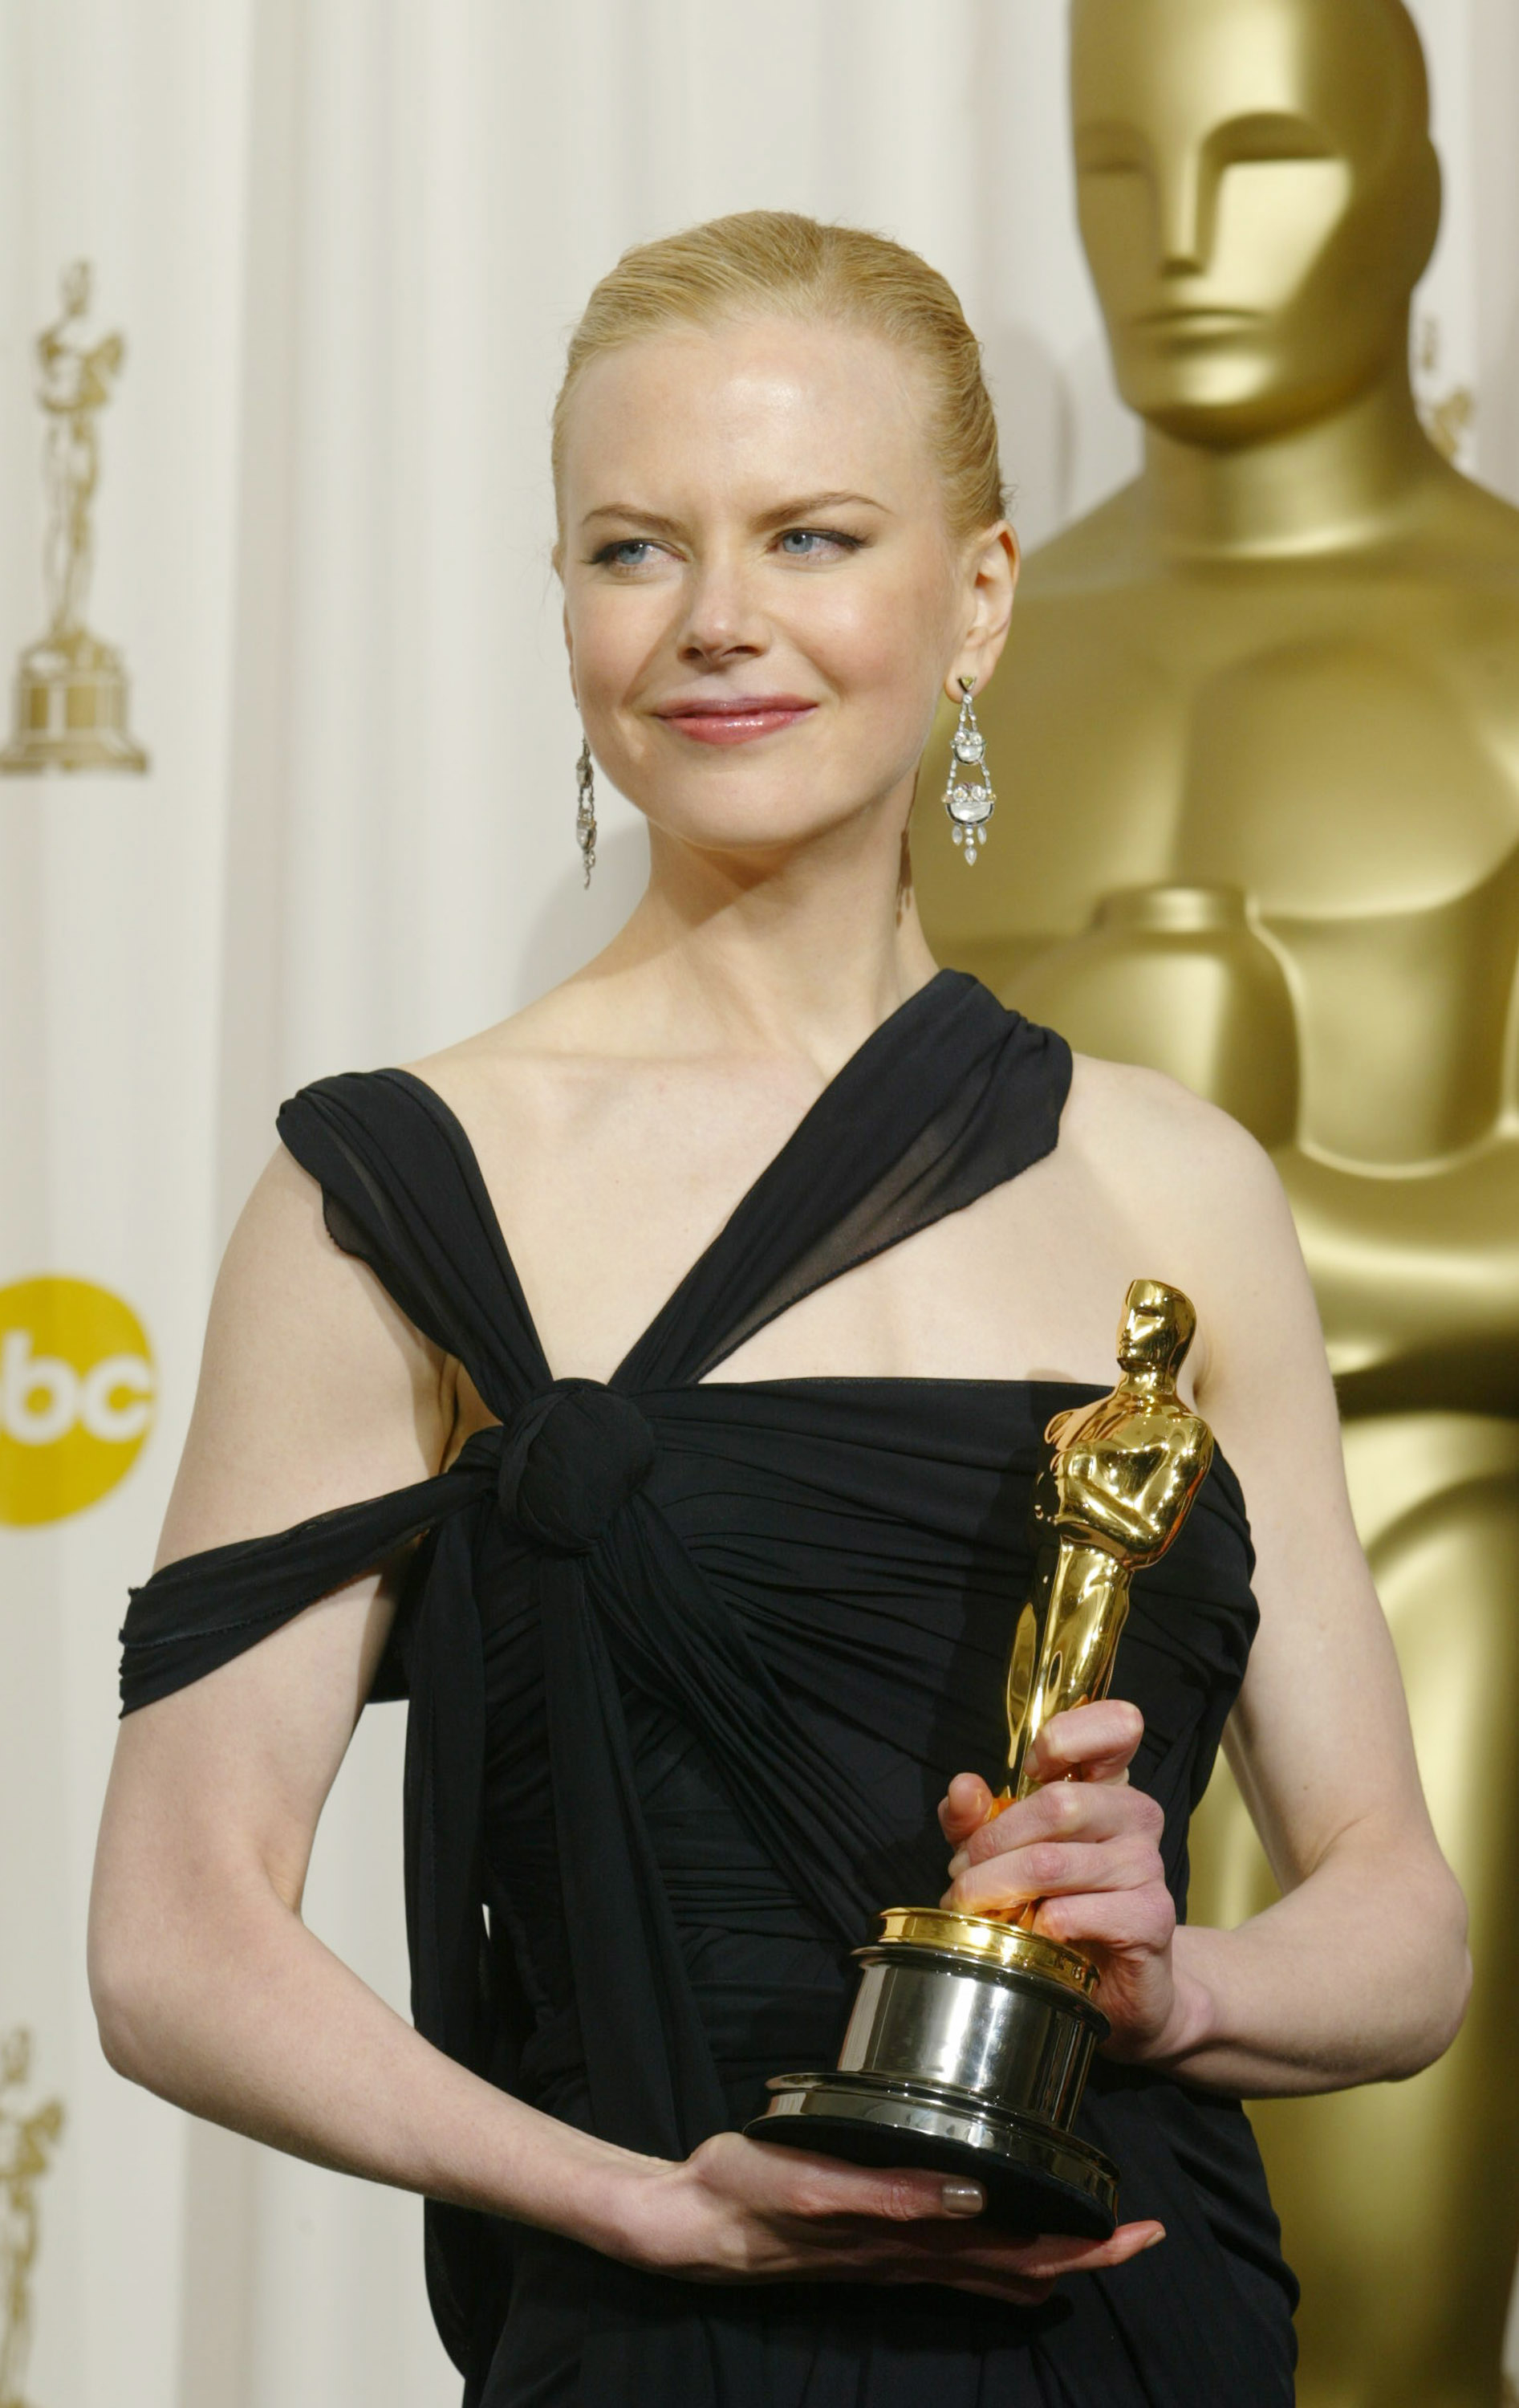 Nicole holds her Oscar as she stands backstage